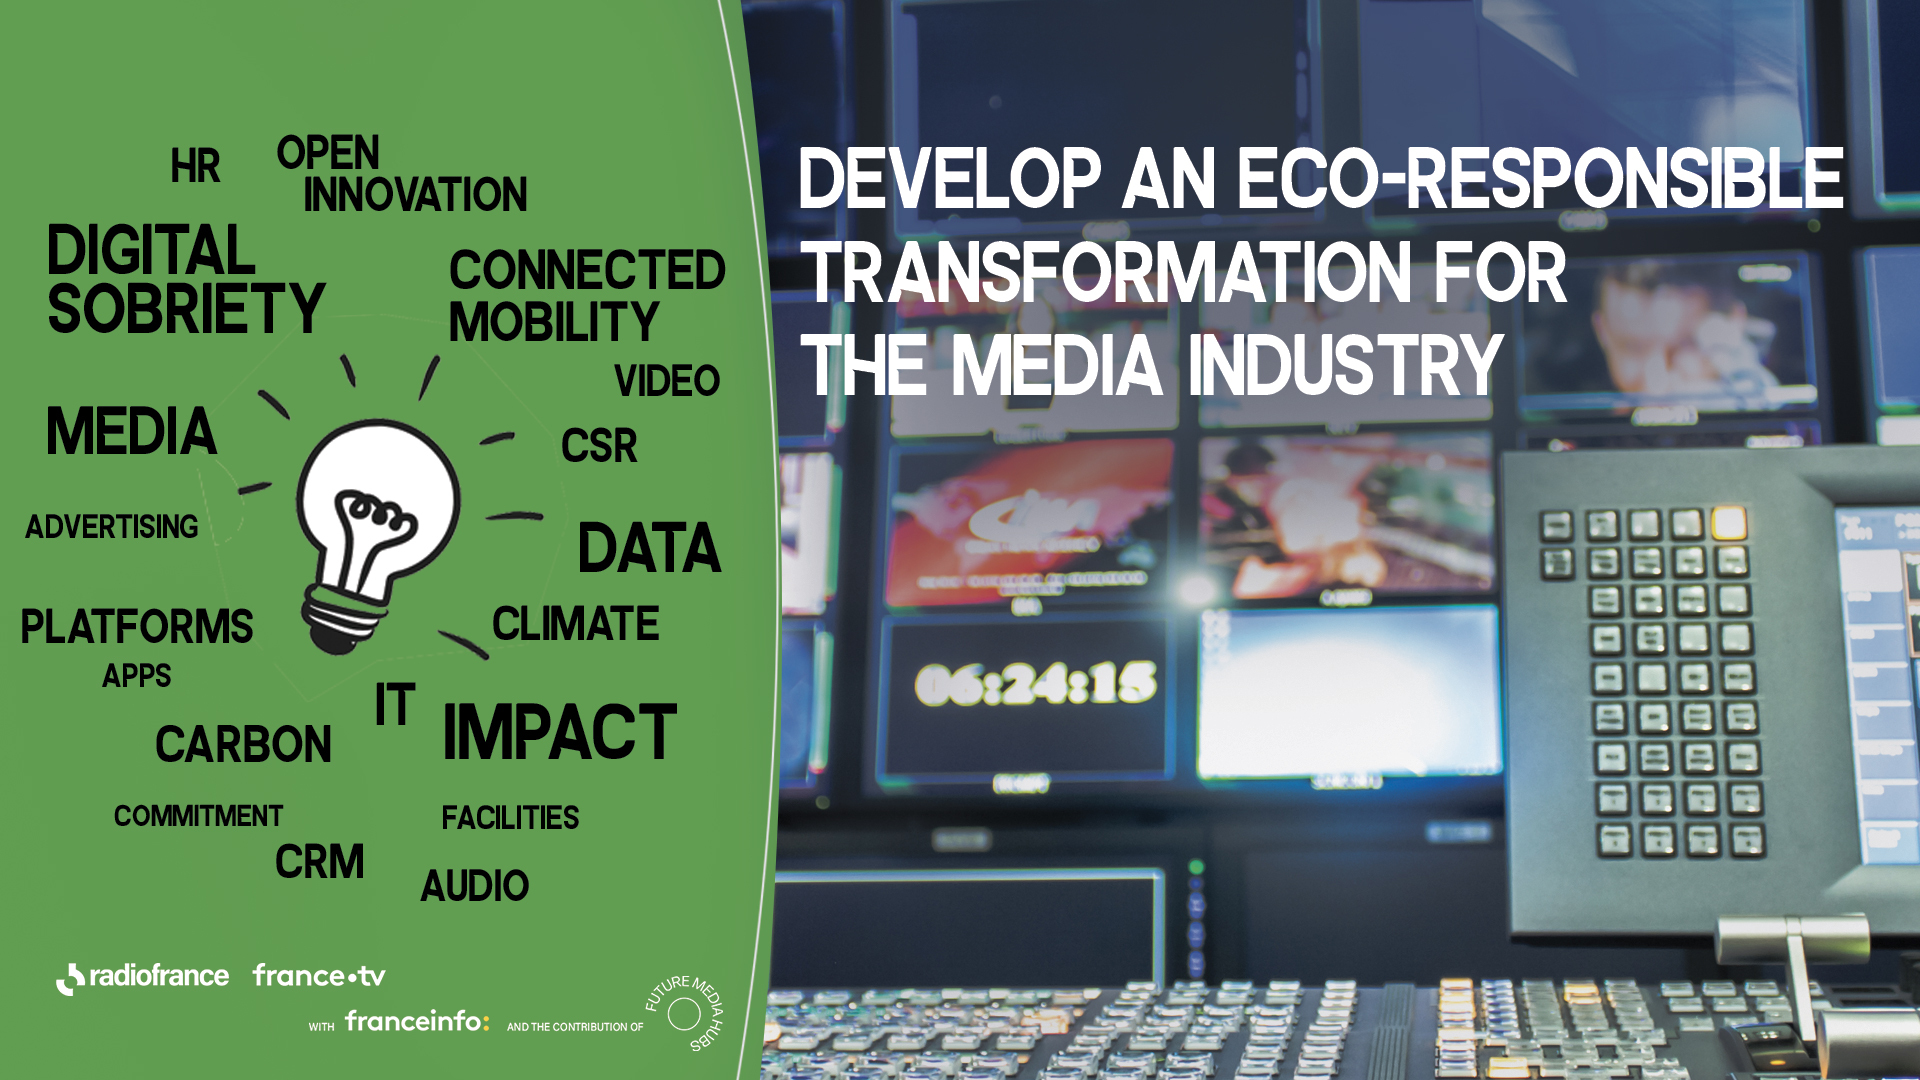 Image d'illustration du challenge "Develop and eco-reponsible transformation for the media industry"